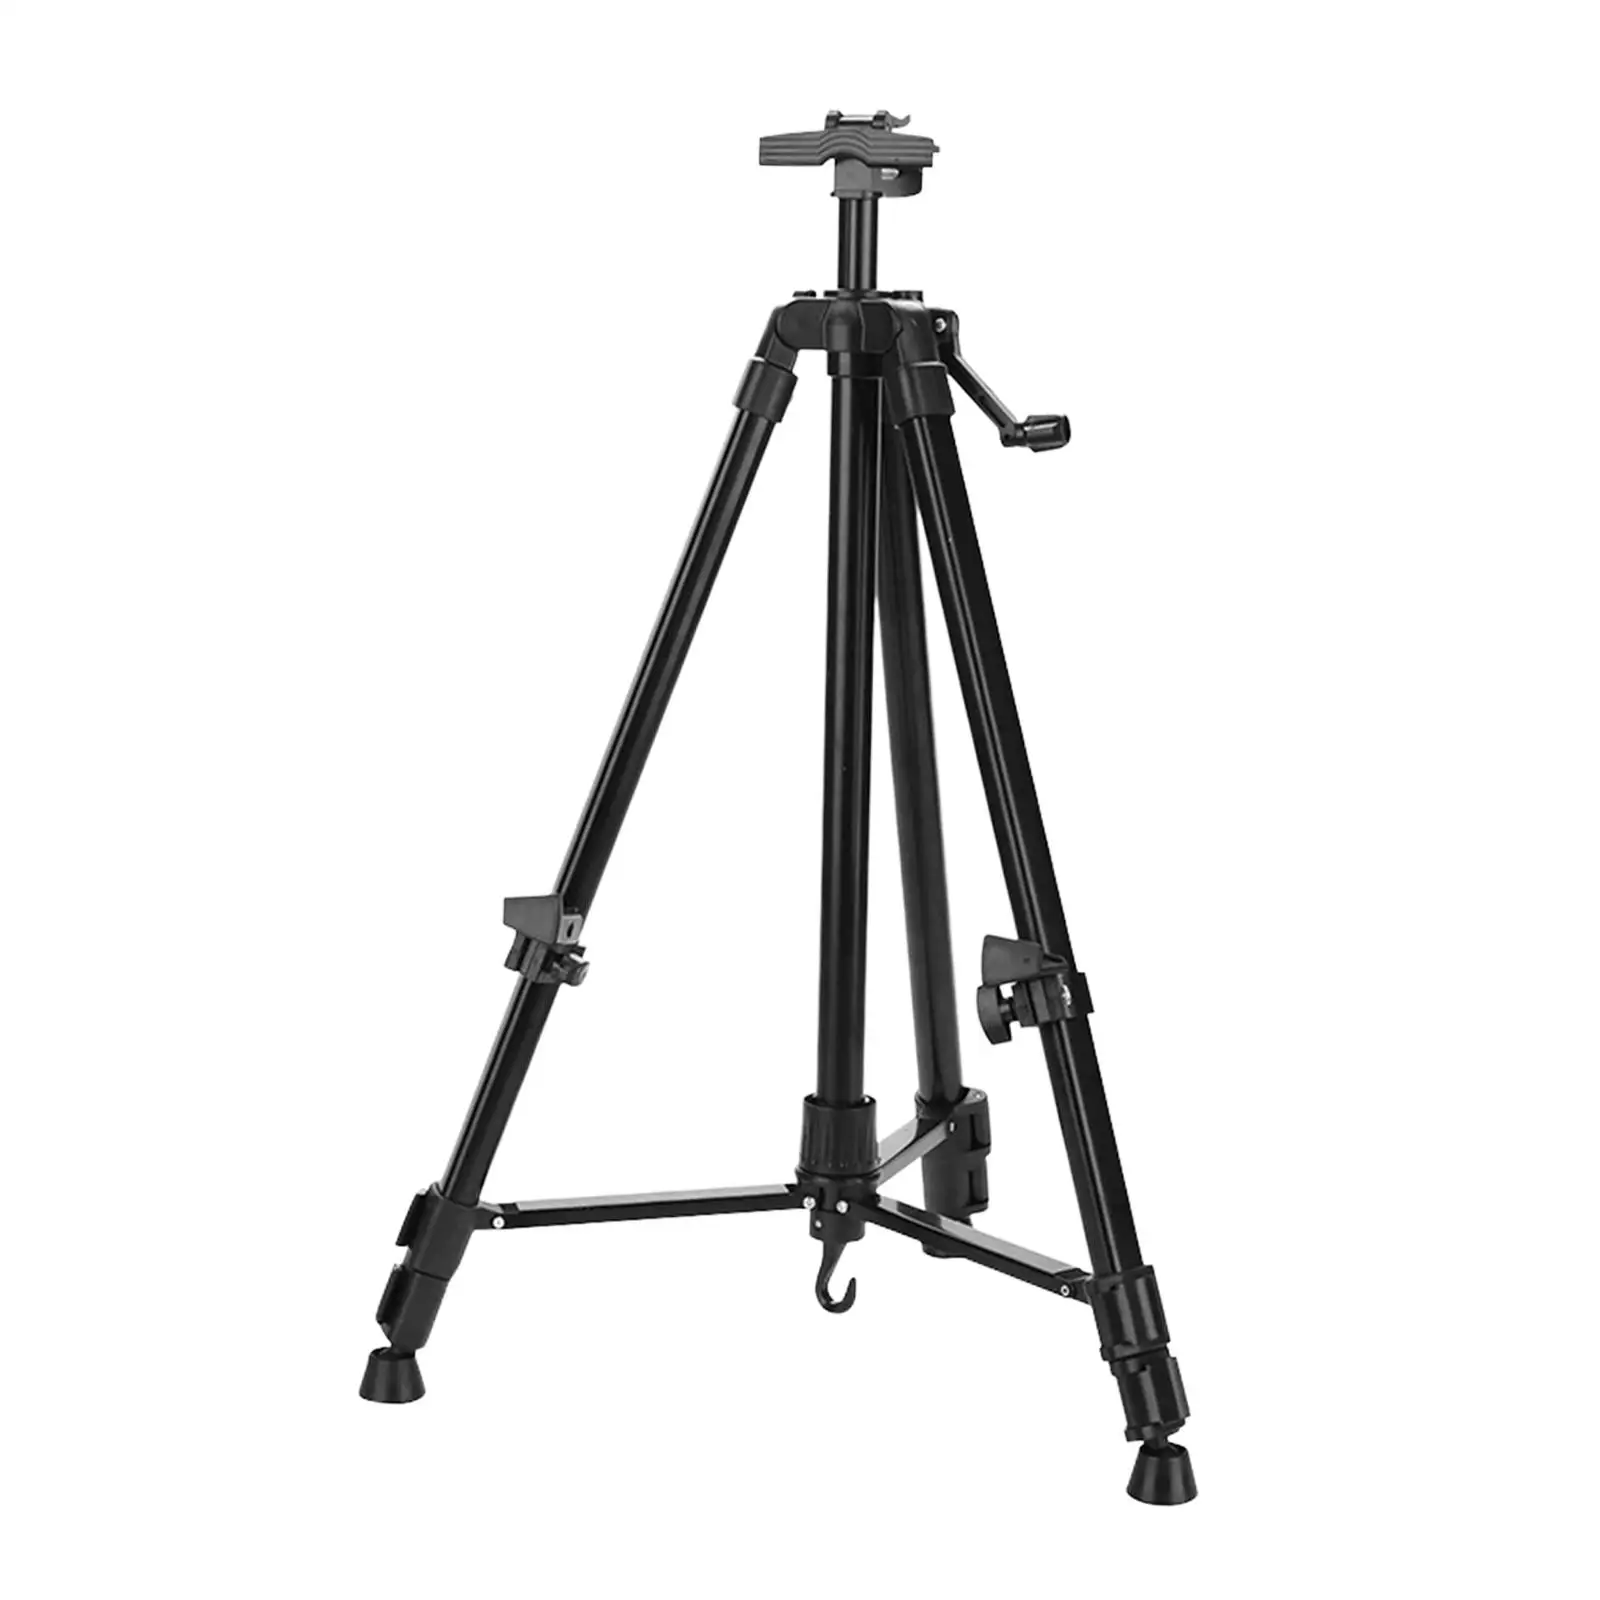 Easel Stand Artist Easel Aluminum Alloy Durable Professional for Drawing and Displaying Stable with Carrying Case 60 Inches Tall easel stand with tray artist painting oporte madera mini canvas easels peinture art picture holder display molbert metal tripod